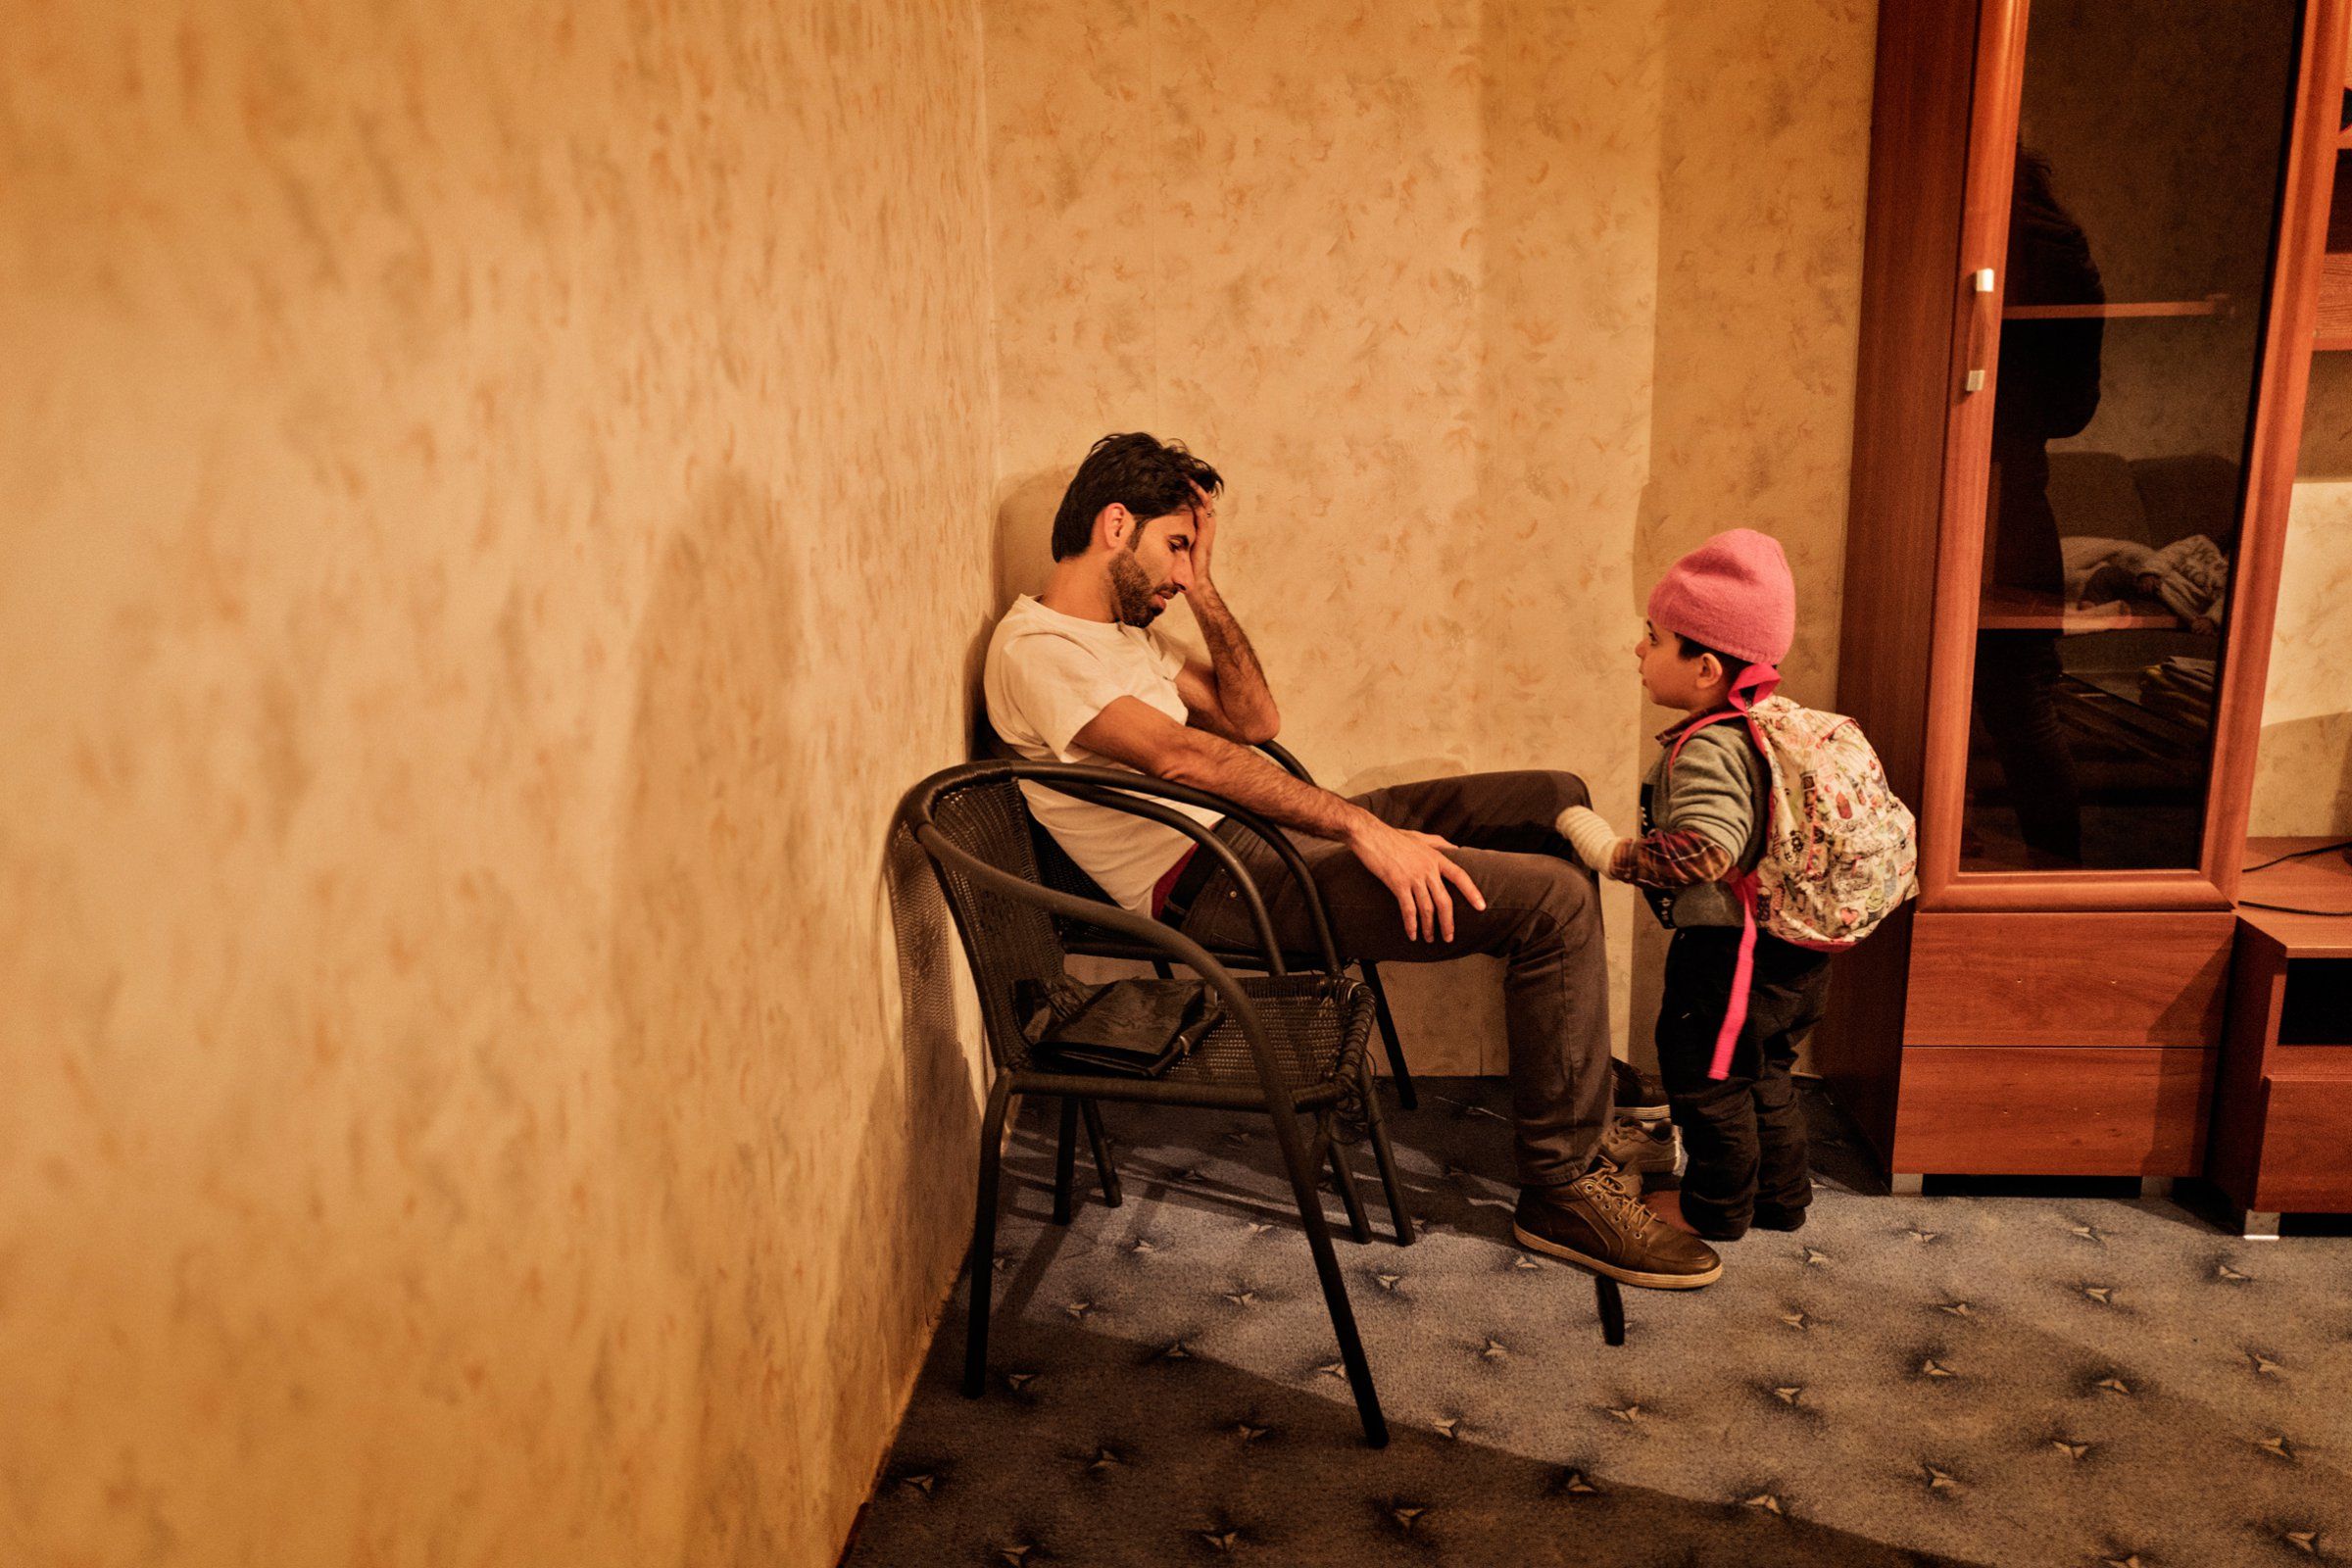 Syrian refugee Muhanned Abzali sits, exhausted, as his son Wael, stands beside him moments after arriving for the first time into the family's new apartment after a long, grueling day of travel and upheaval once again from Athens to their new home in Polva, Estonia. Image by Lynsey Addario. Estonia, 2017. 